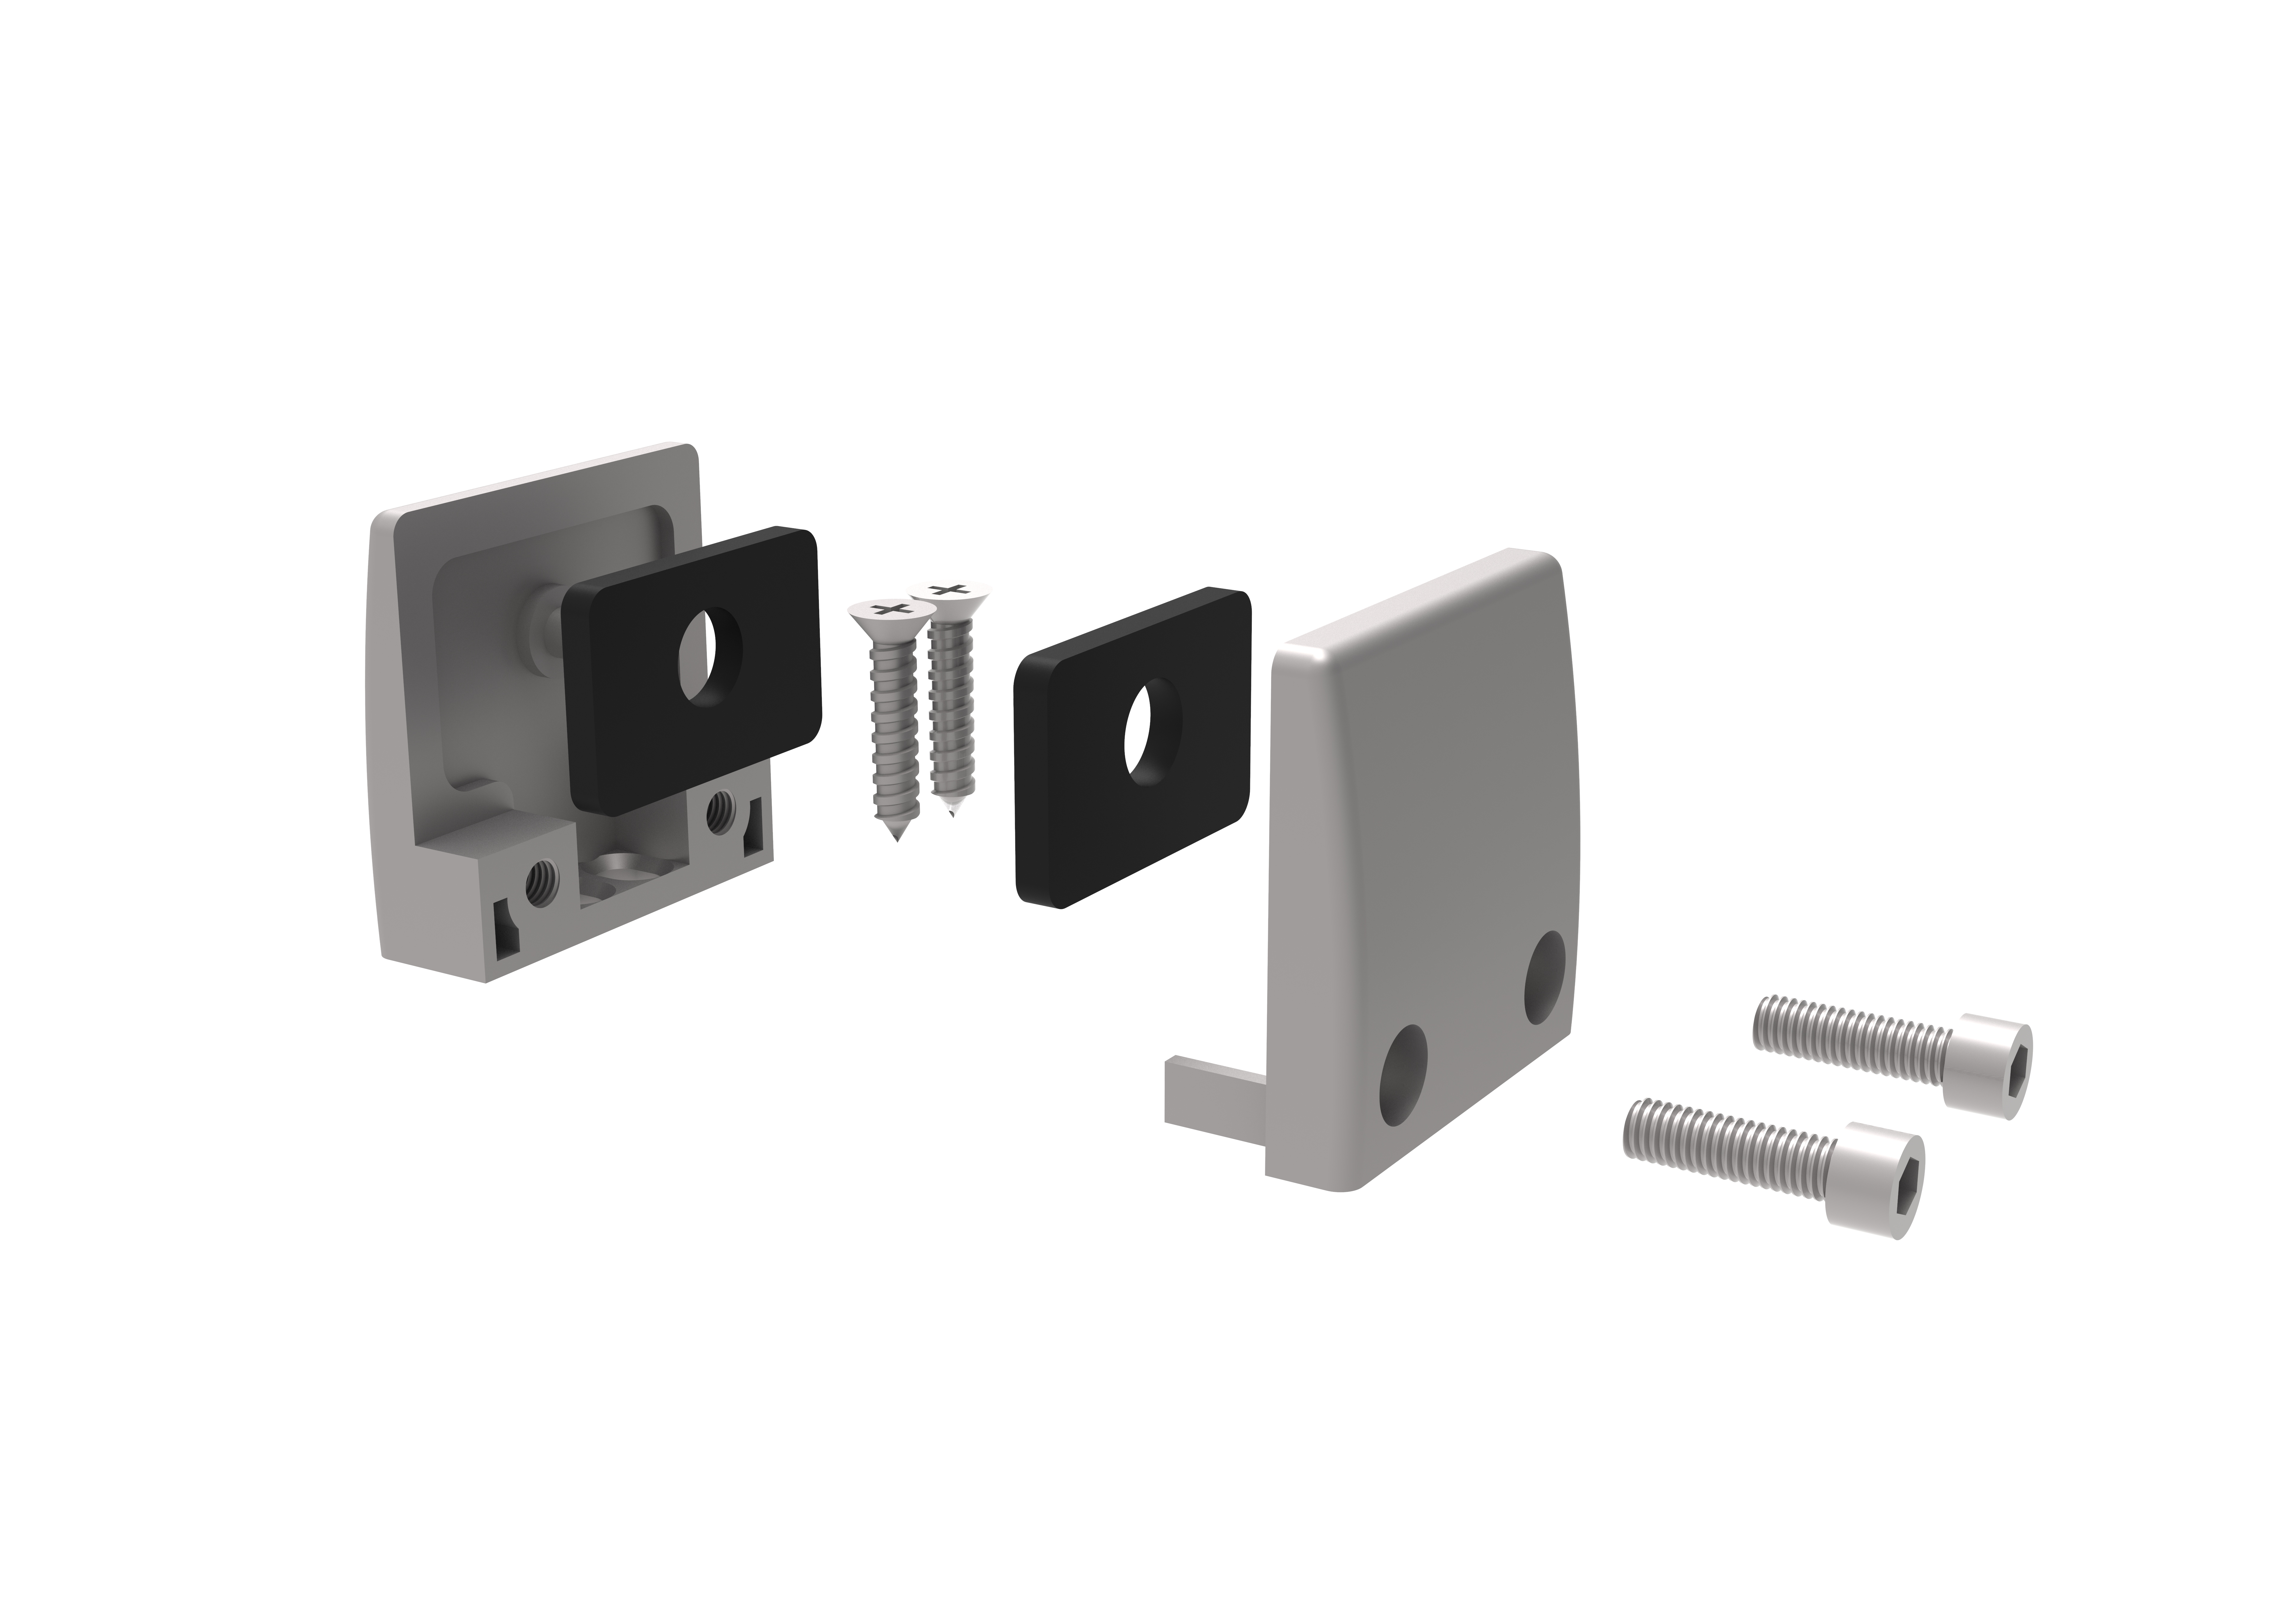 Upmouted Panel Brackets for Thickness 5.5mm~16mm